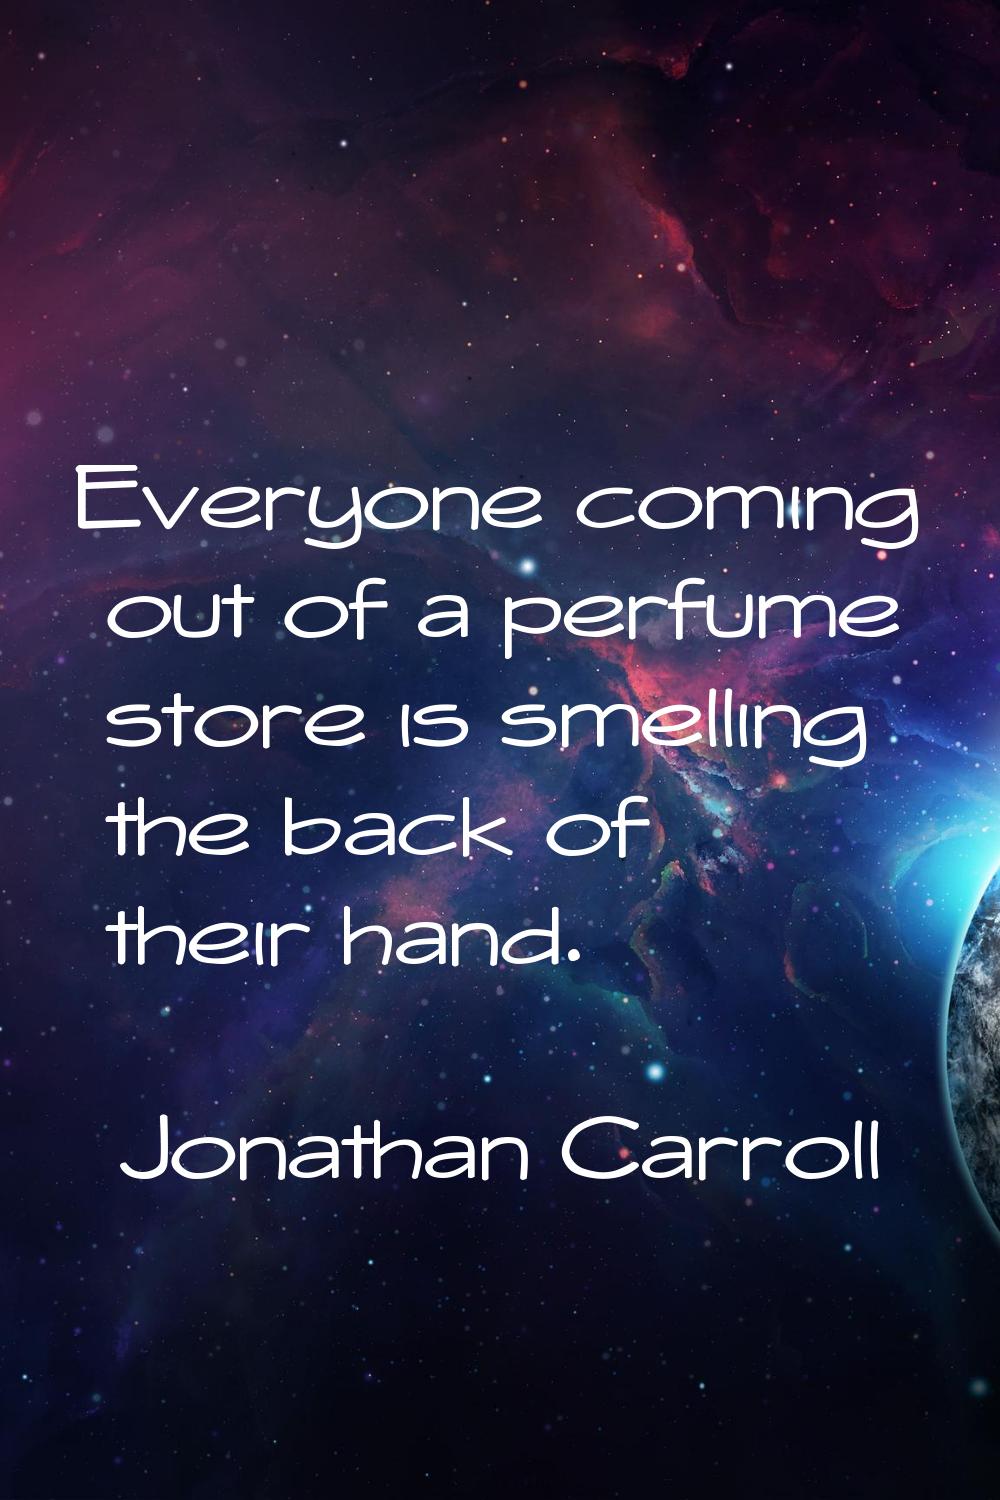 Everyone coming out of a perfume store is smelling the back of their hand.